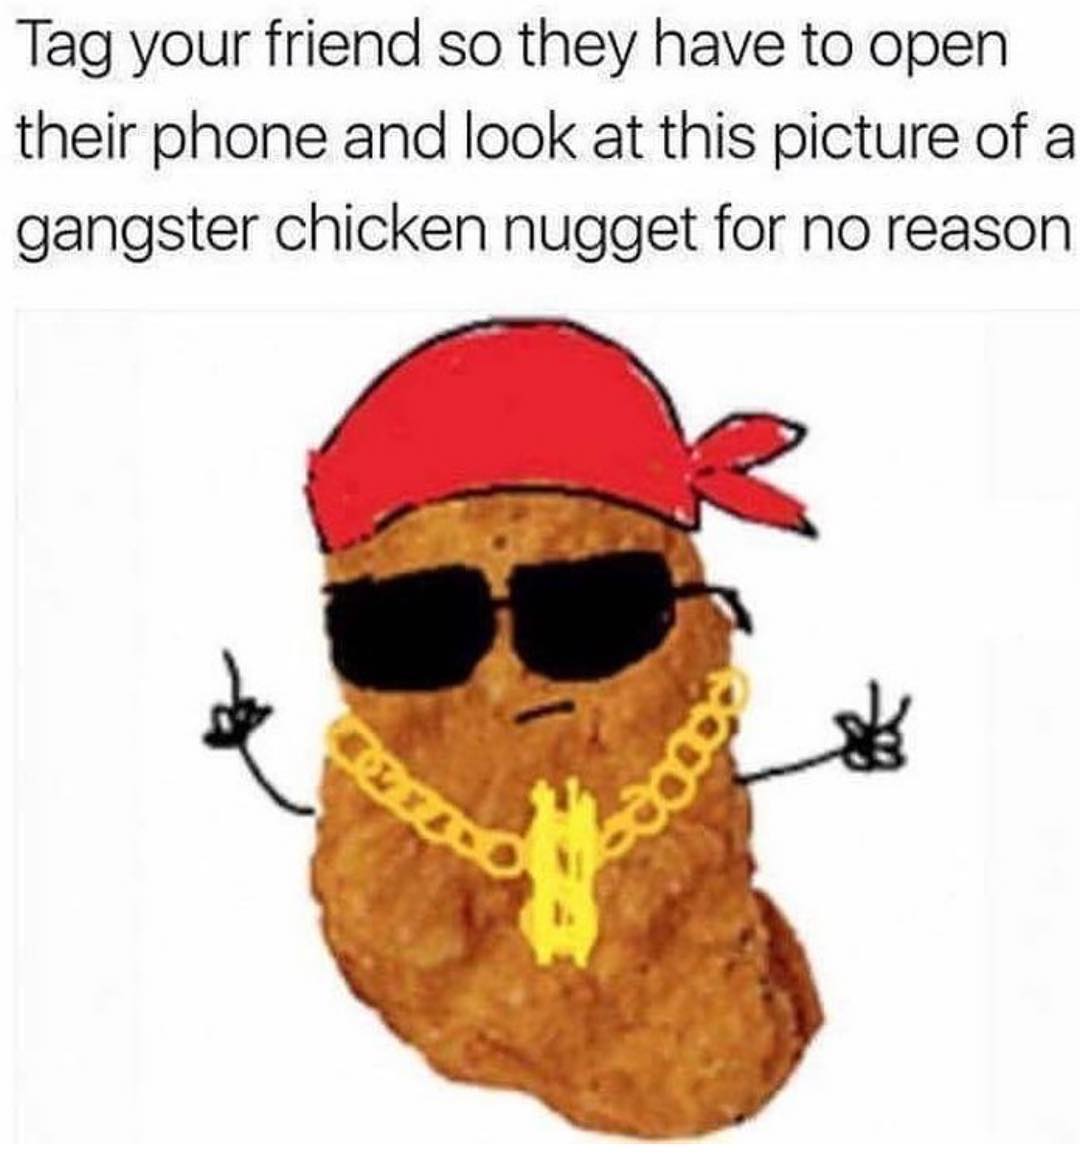 Tag your friend so they have to open their phone and look at this picture of a gangster chicken nugget for no reason.